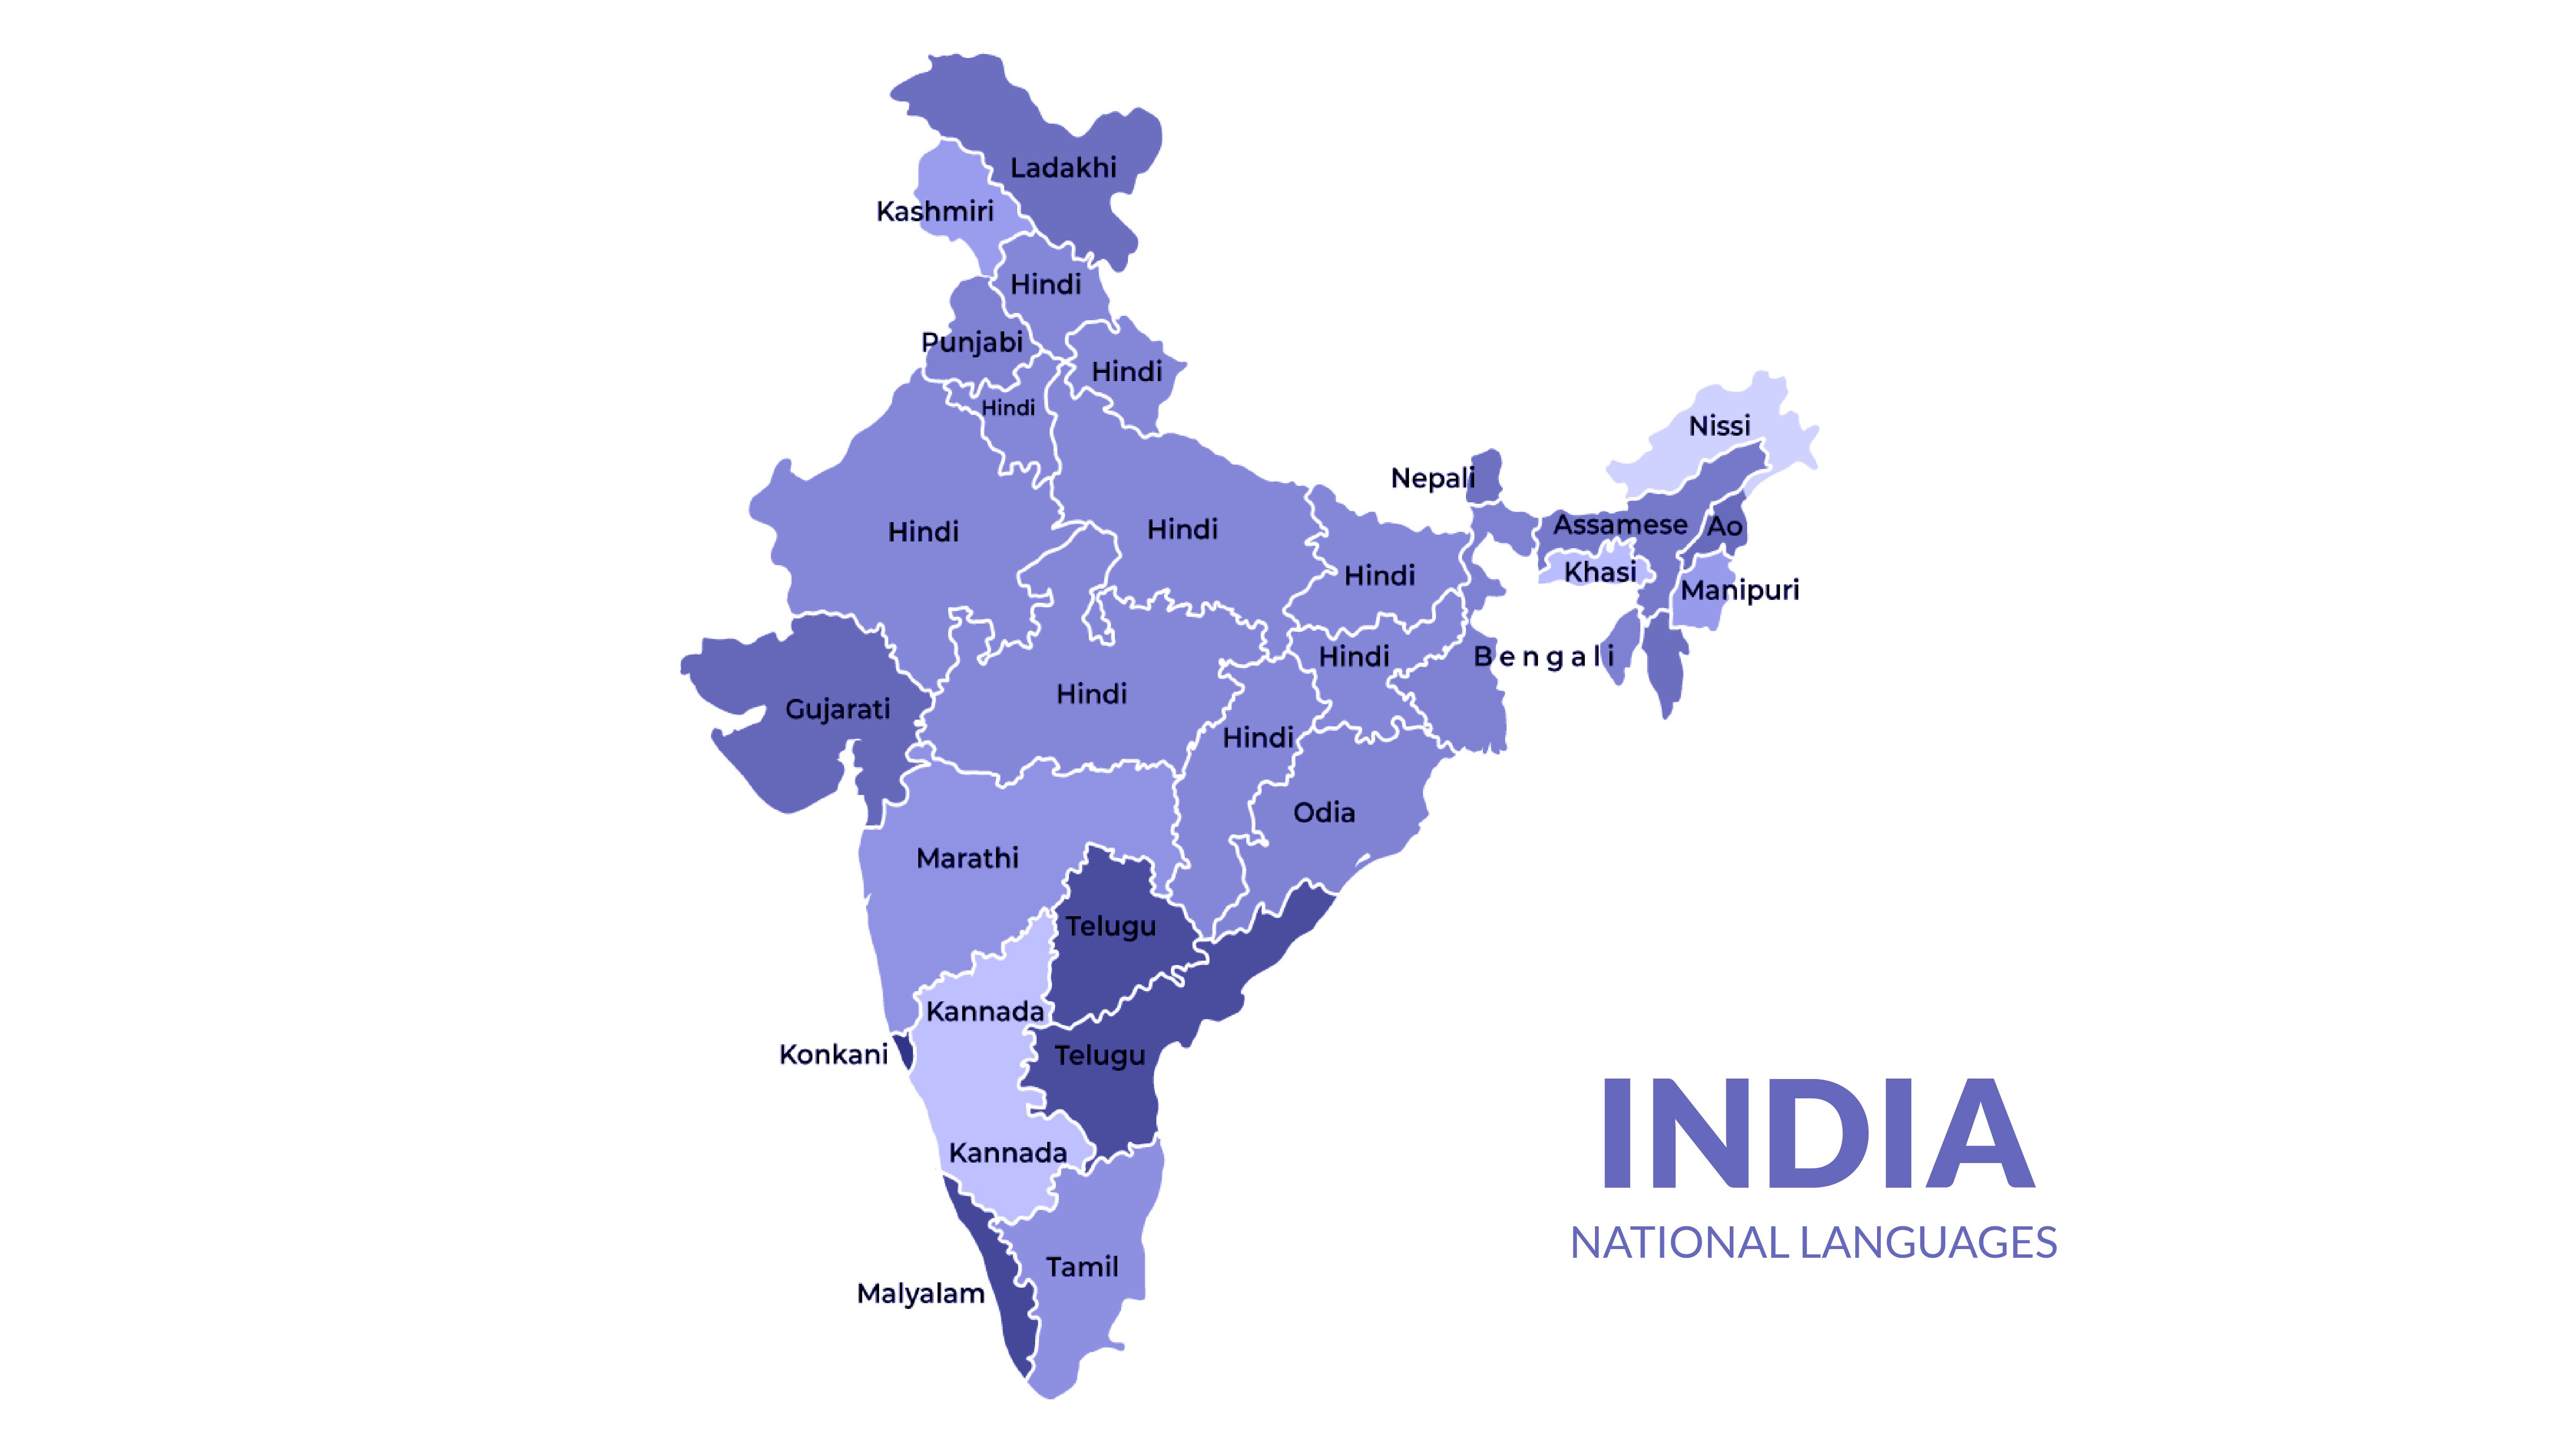 A map showing the national languages of India.